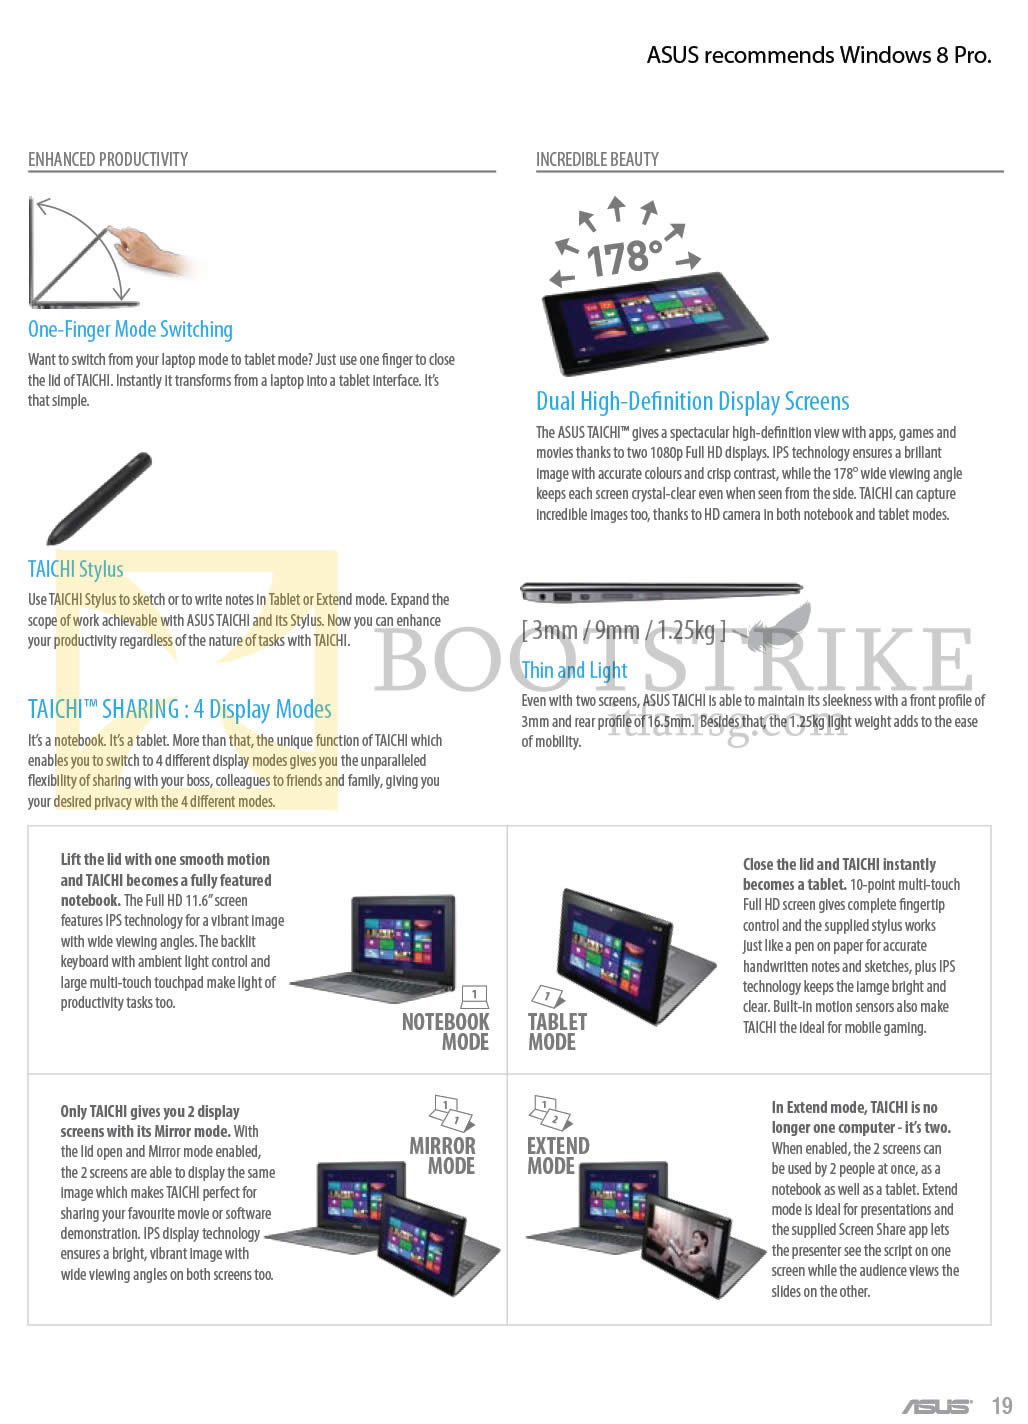 COMEX 2013 price list image brochure of ASUS Notebooks Taichi Features Stylus, Mode Switching, 4 Display Modes